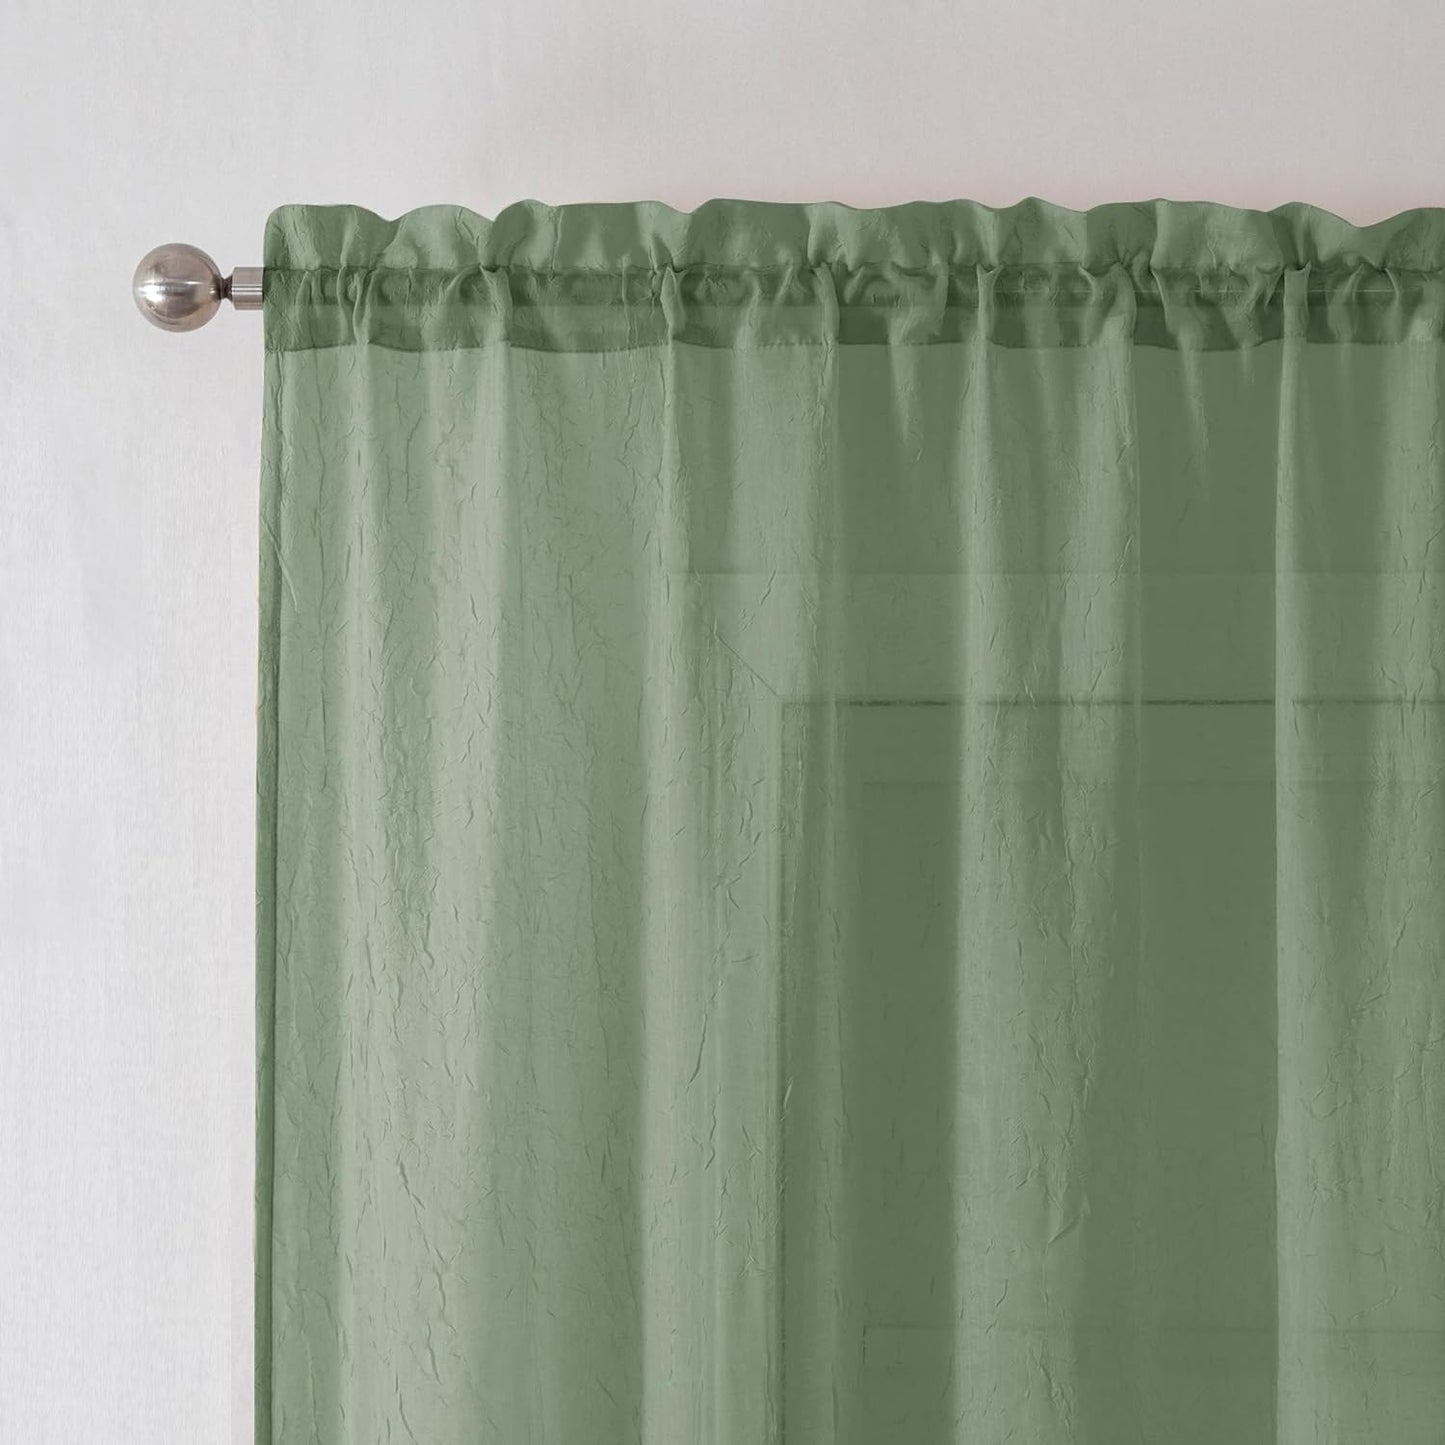 Crushed Sheer White Curtains 63 Inch Length 2 Panels, Light Filtering Solid Crinkle Voile Short Sheer Curtian for Bedroom Living Room, Each 42Wx63L Inches  Chyhomenyc Sage Green 42 W X 96 L 